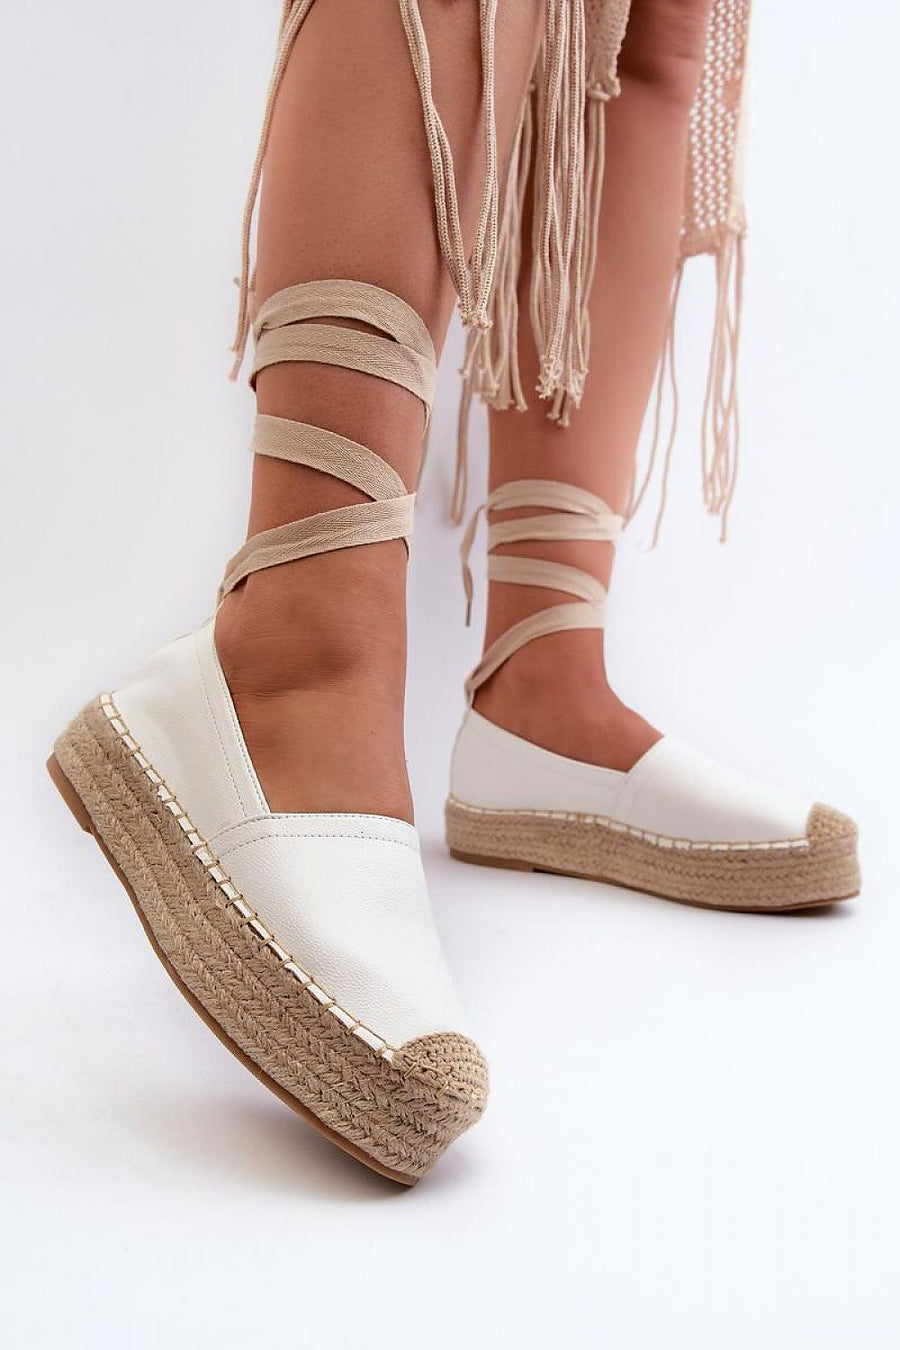 Espadrilles Model 197131 Step in style